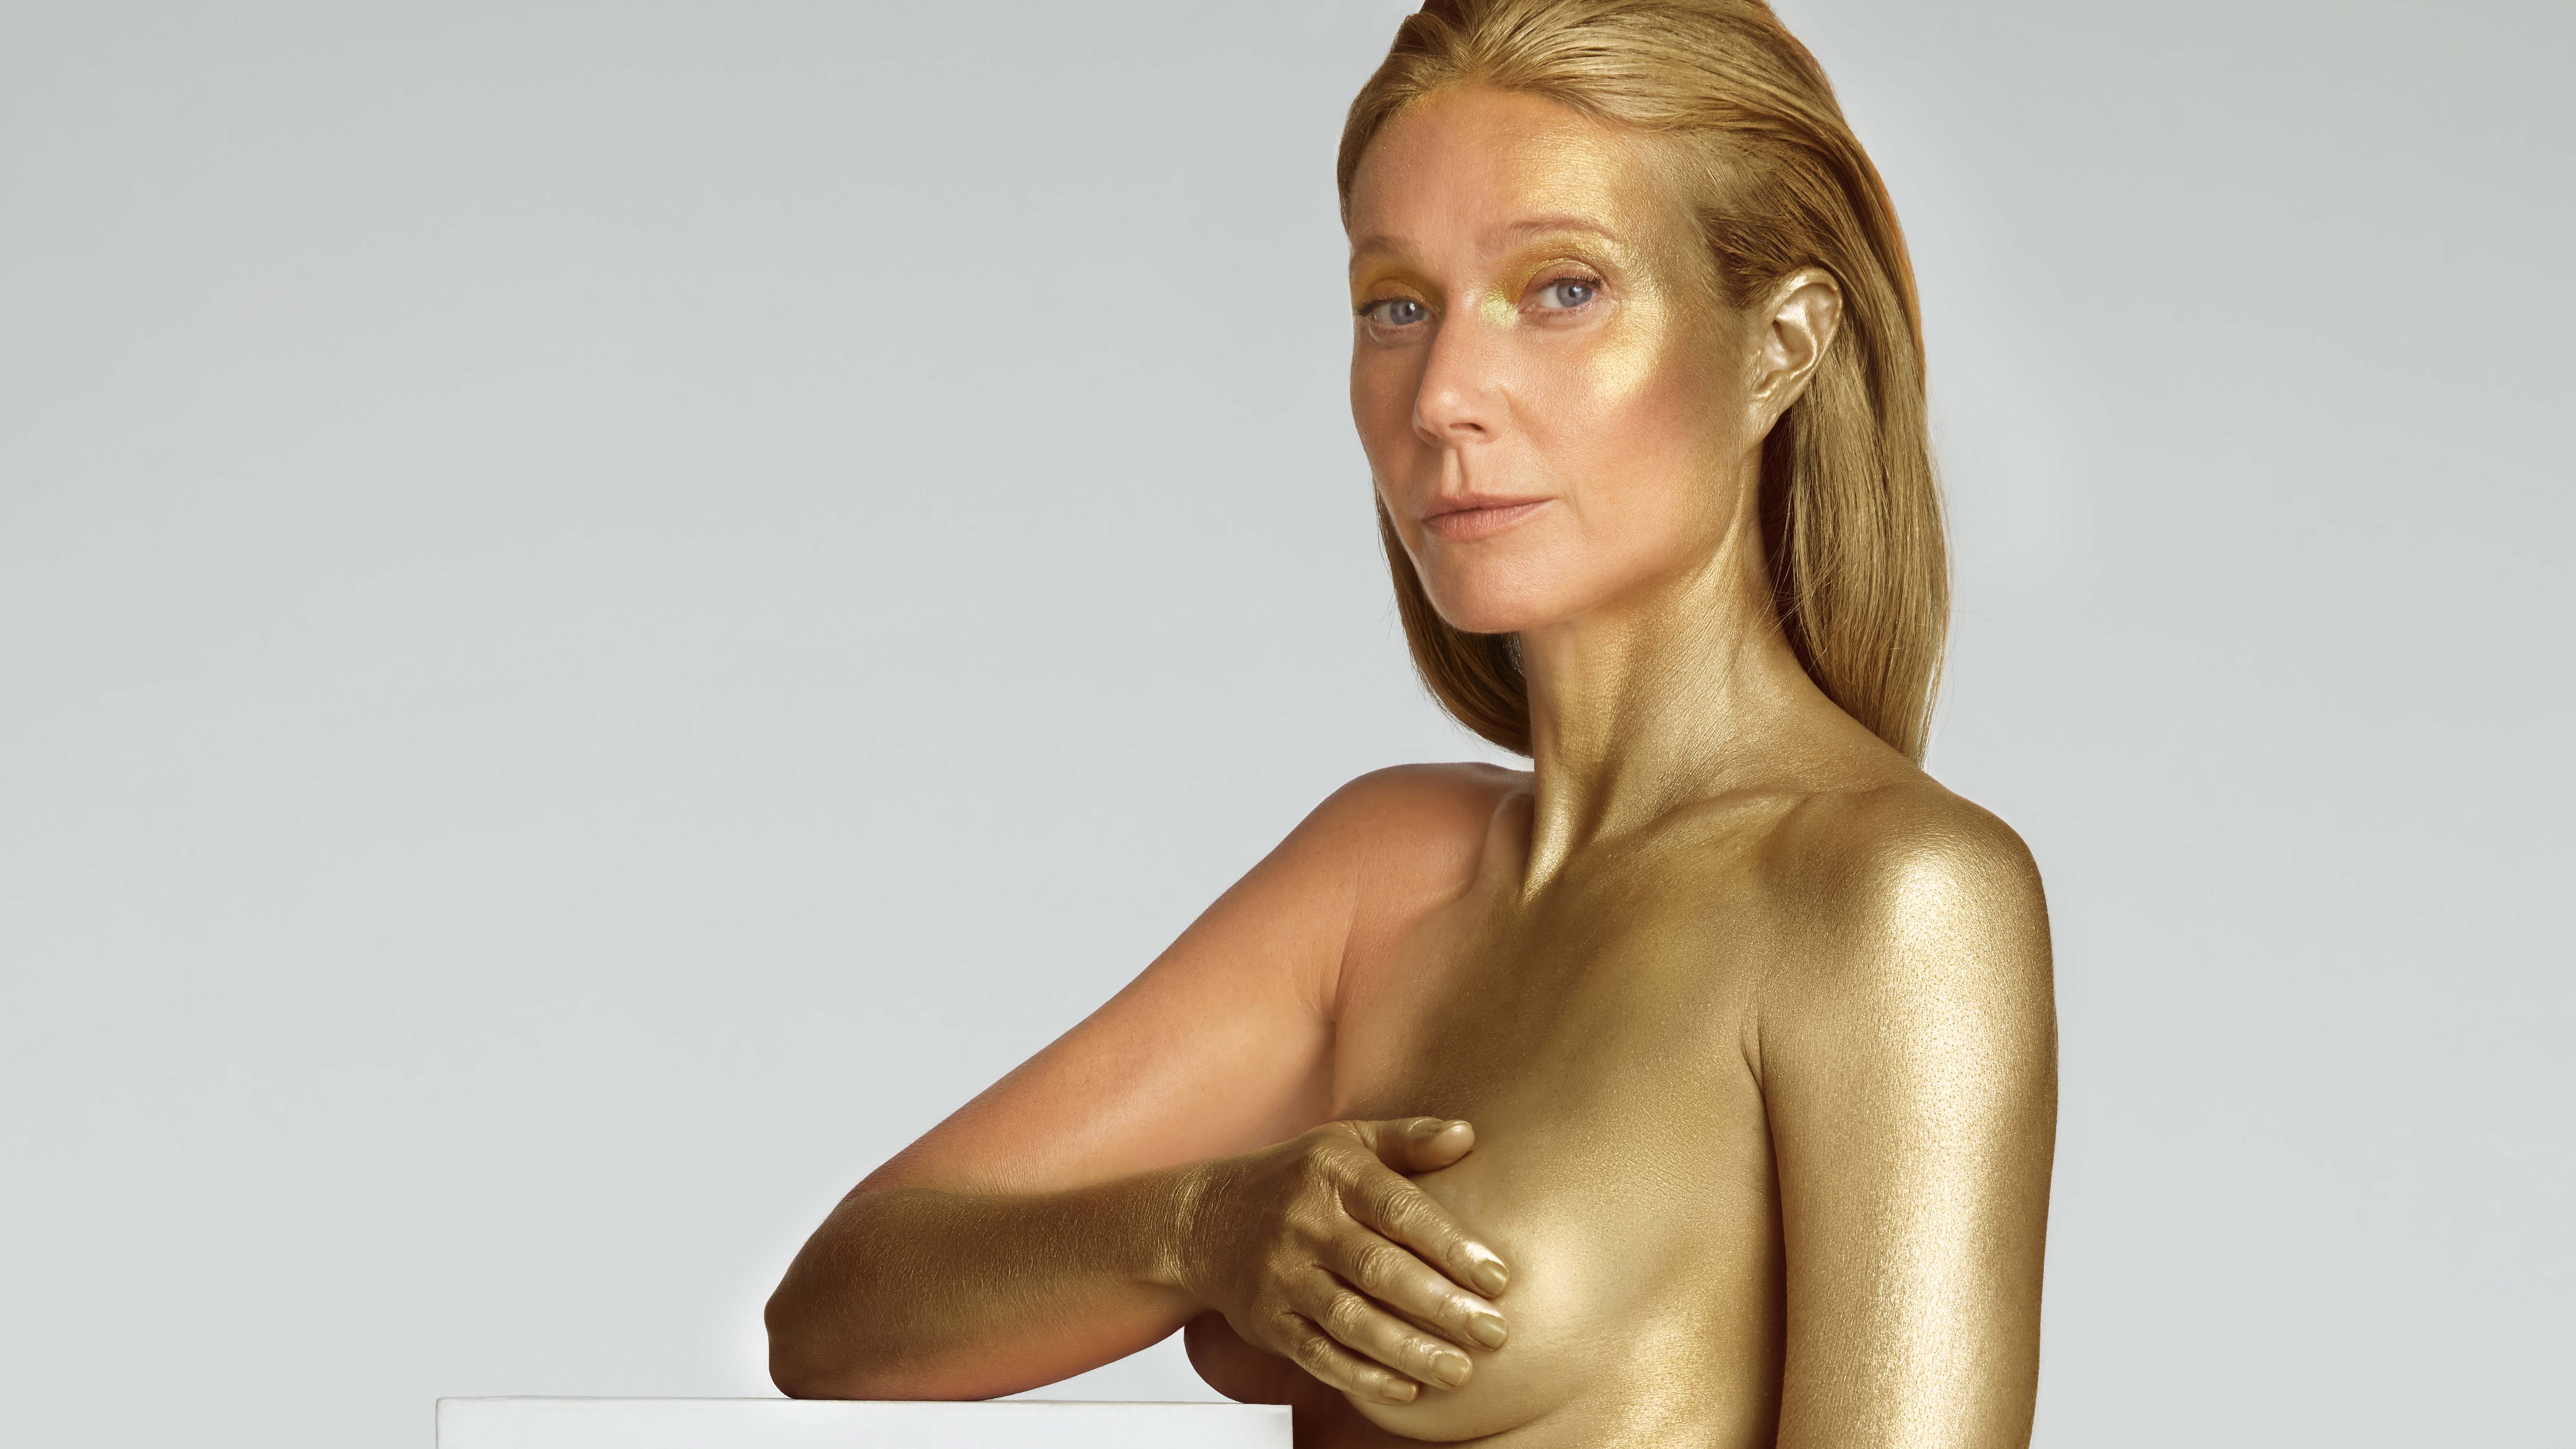 Gwyneth Paltrow Poses Nude for Her 50th Birthday in Stunning Photoshoot Entertainment Tonight